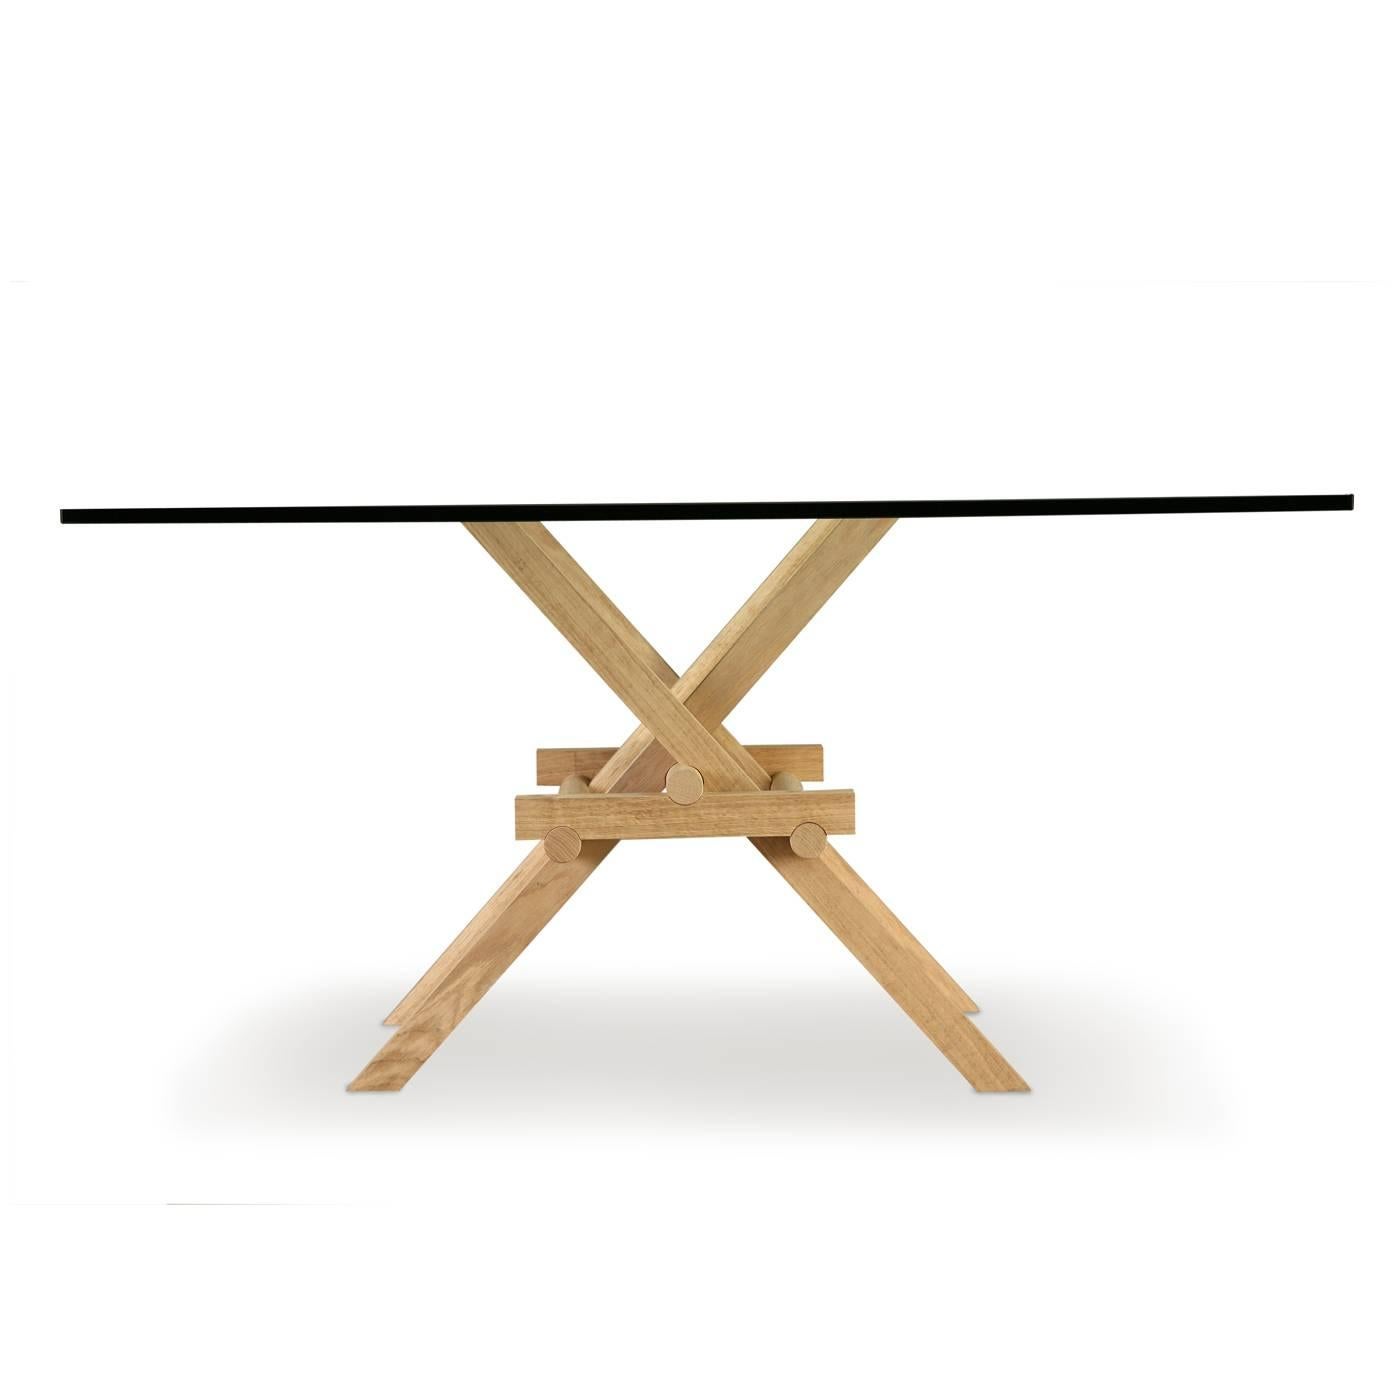 Marco Ferreri was inspired by Leonardo da Vinci's mobile bridges in designing this dining table that features a system of legs made of solid ashwood that are connected through a skillful combination of joints, giving it the solid strength to support